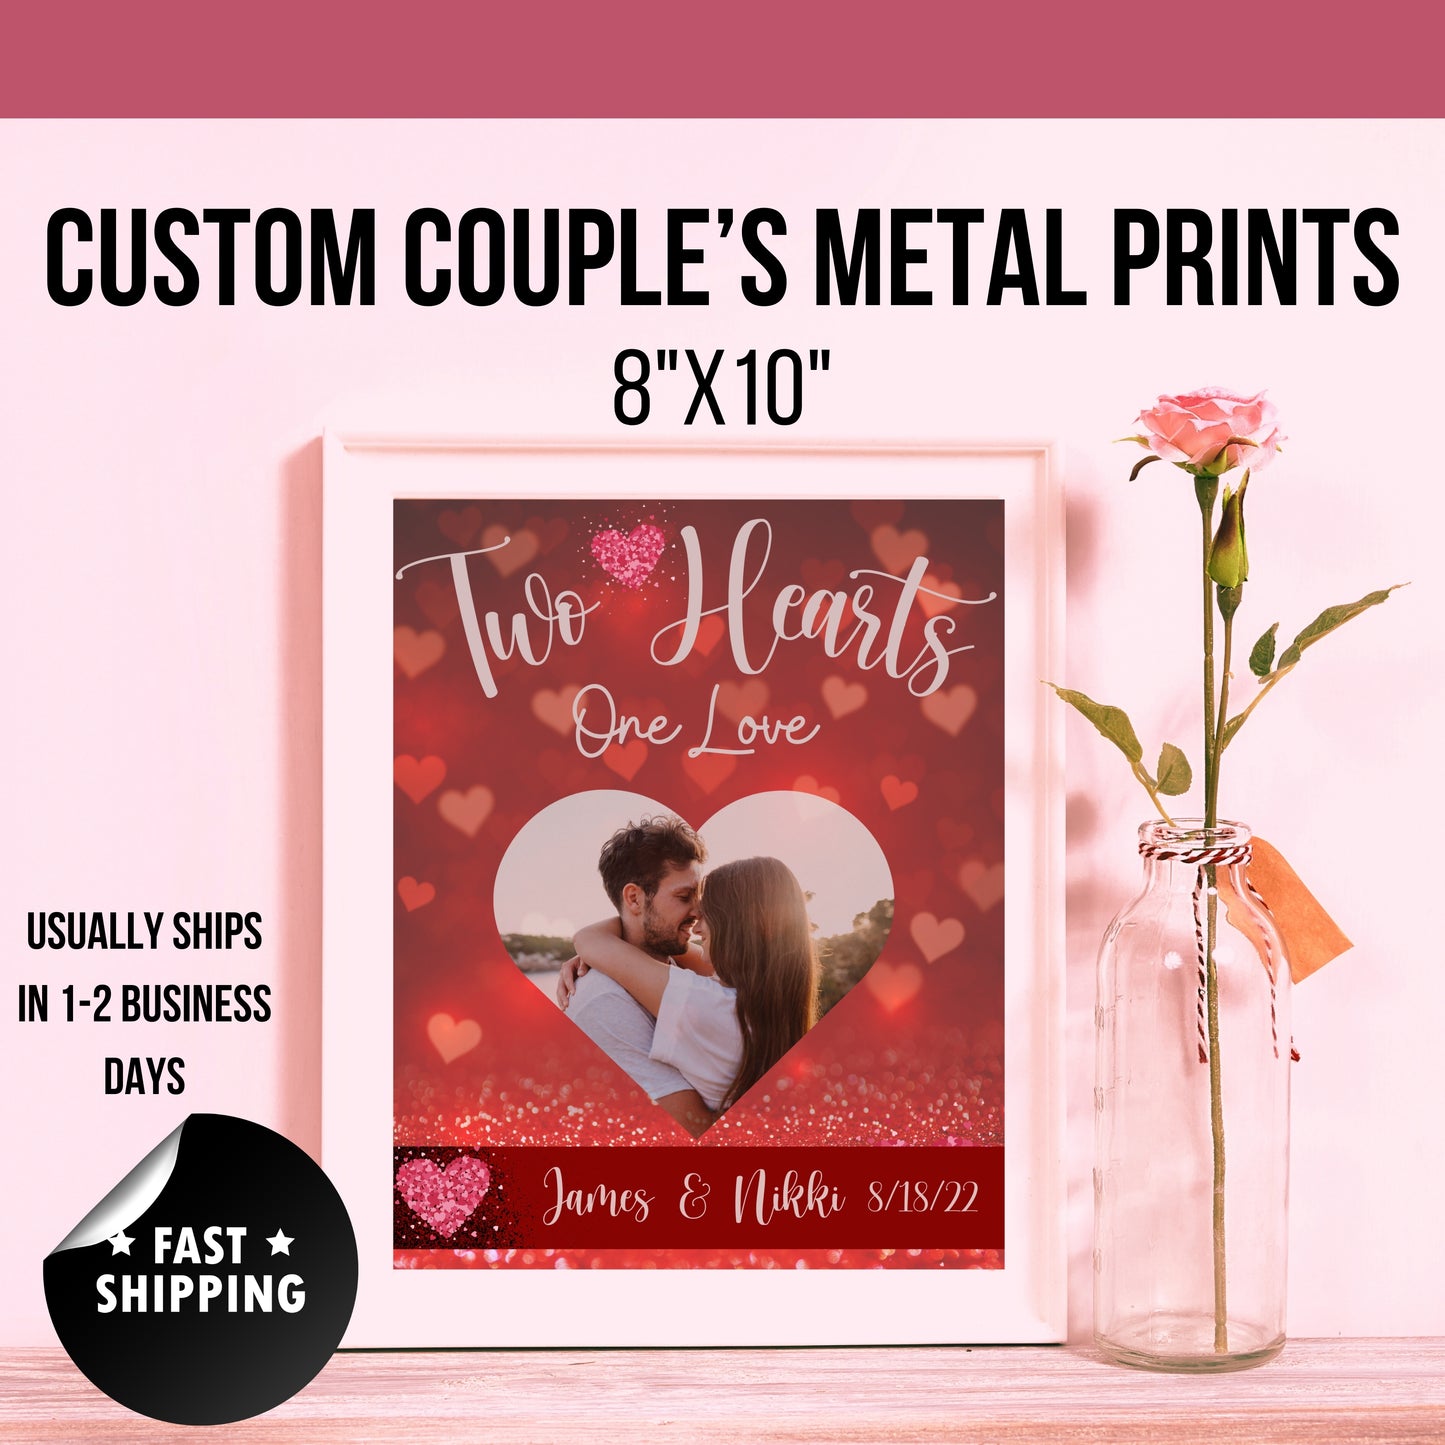 Customized 8x10 metal print romantic couple's gift with personalized photo, names, and date.